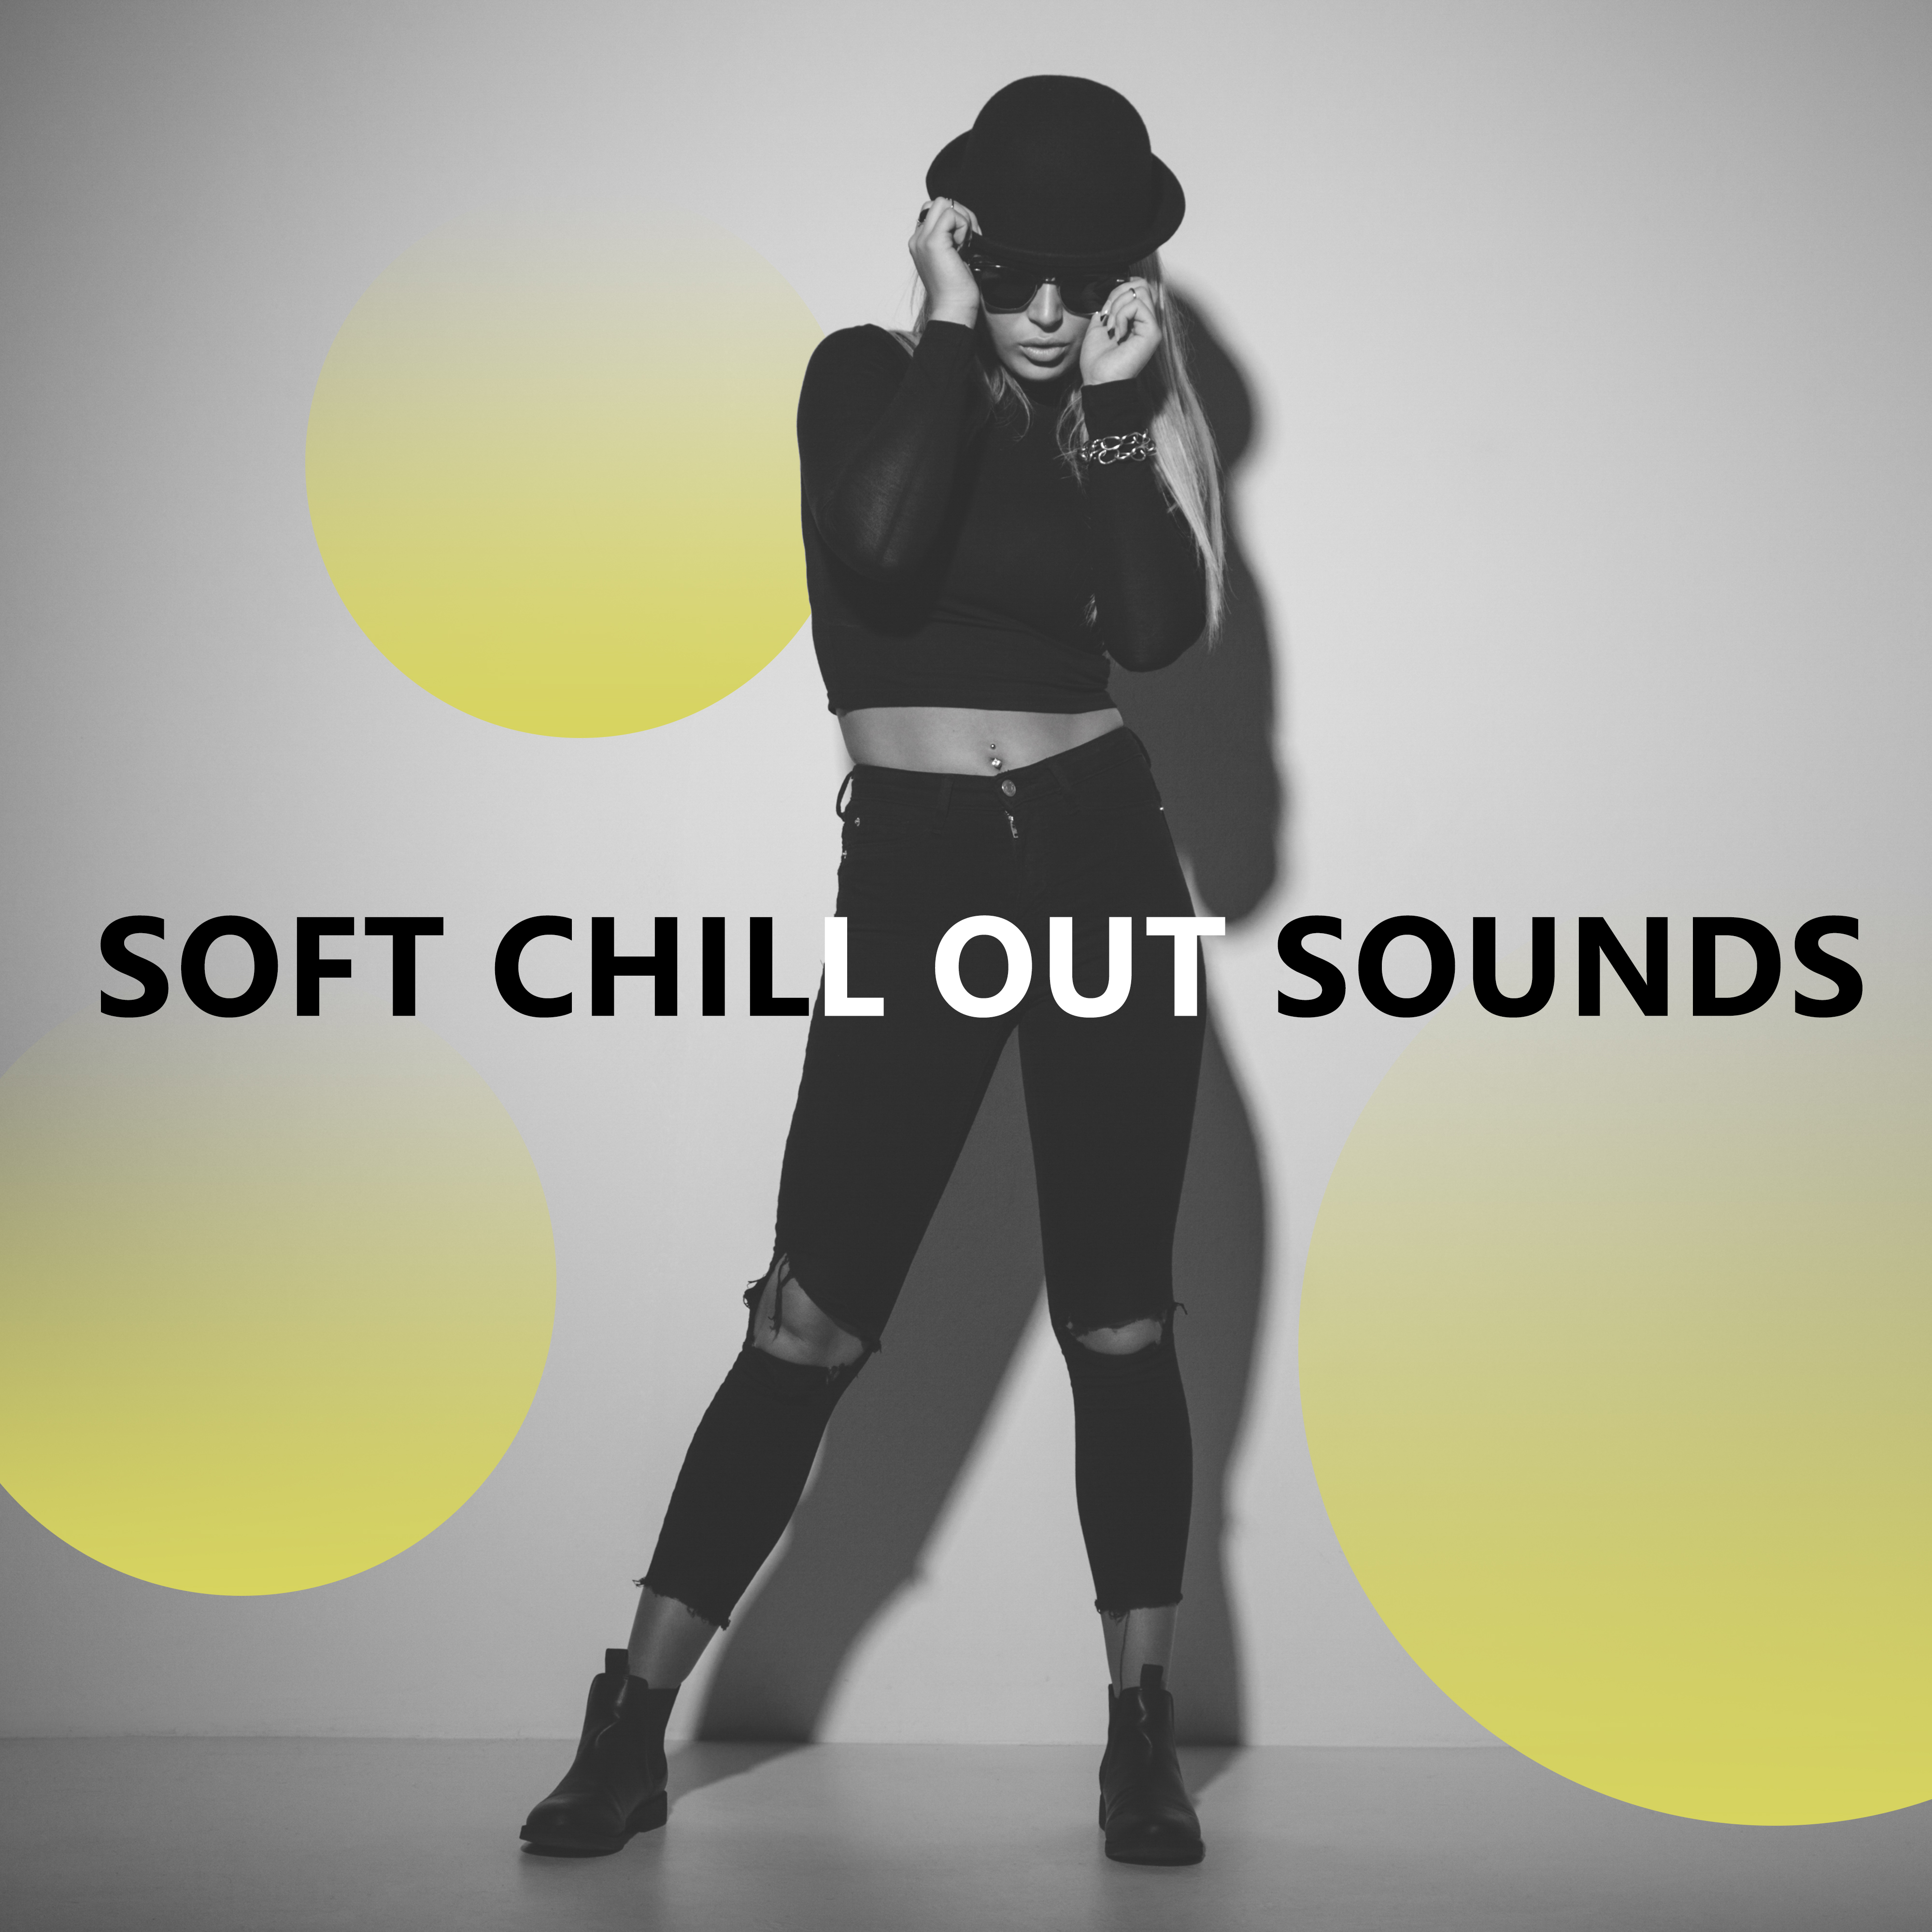 Soft Chill Out Sounds – Calm Down & Relax, Peaceful Vibes, Stress Relief, Chill Out Beats